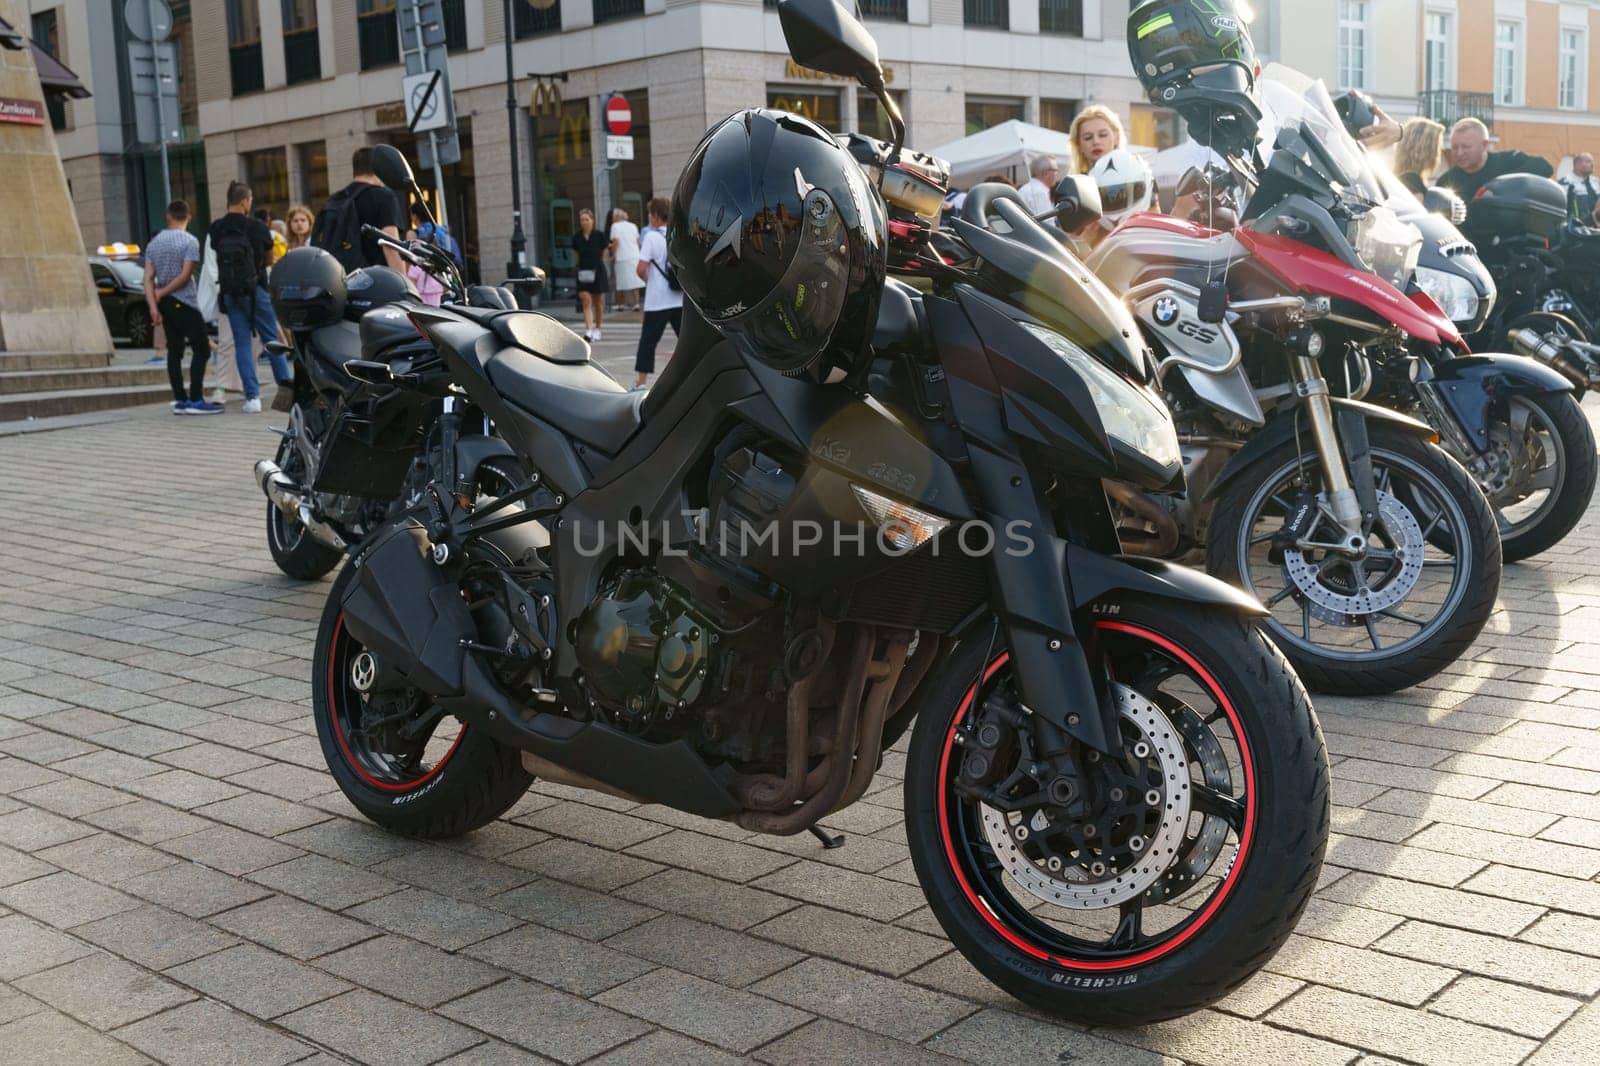 A black Kawasaki motorcycle is parked in the square. by Sd28DimoN_1976